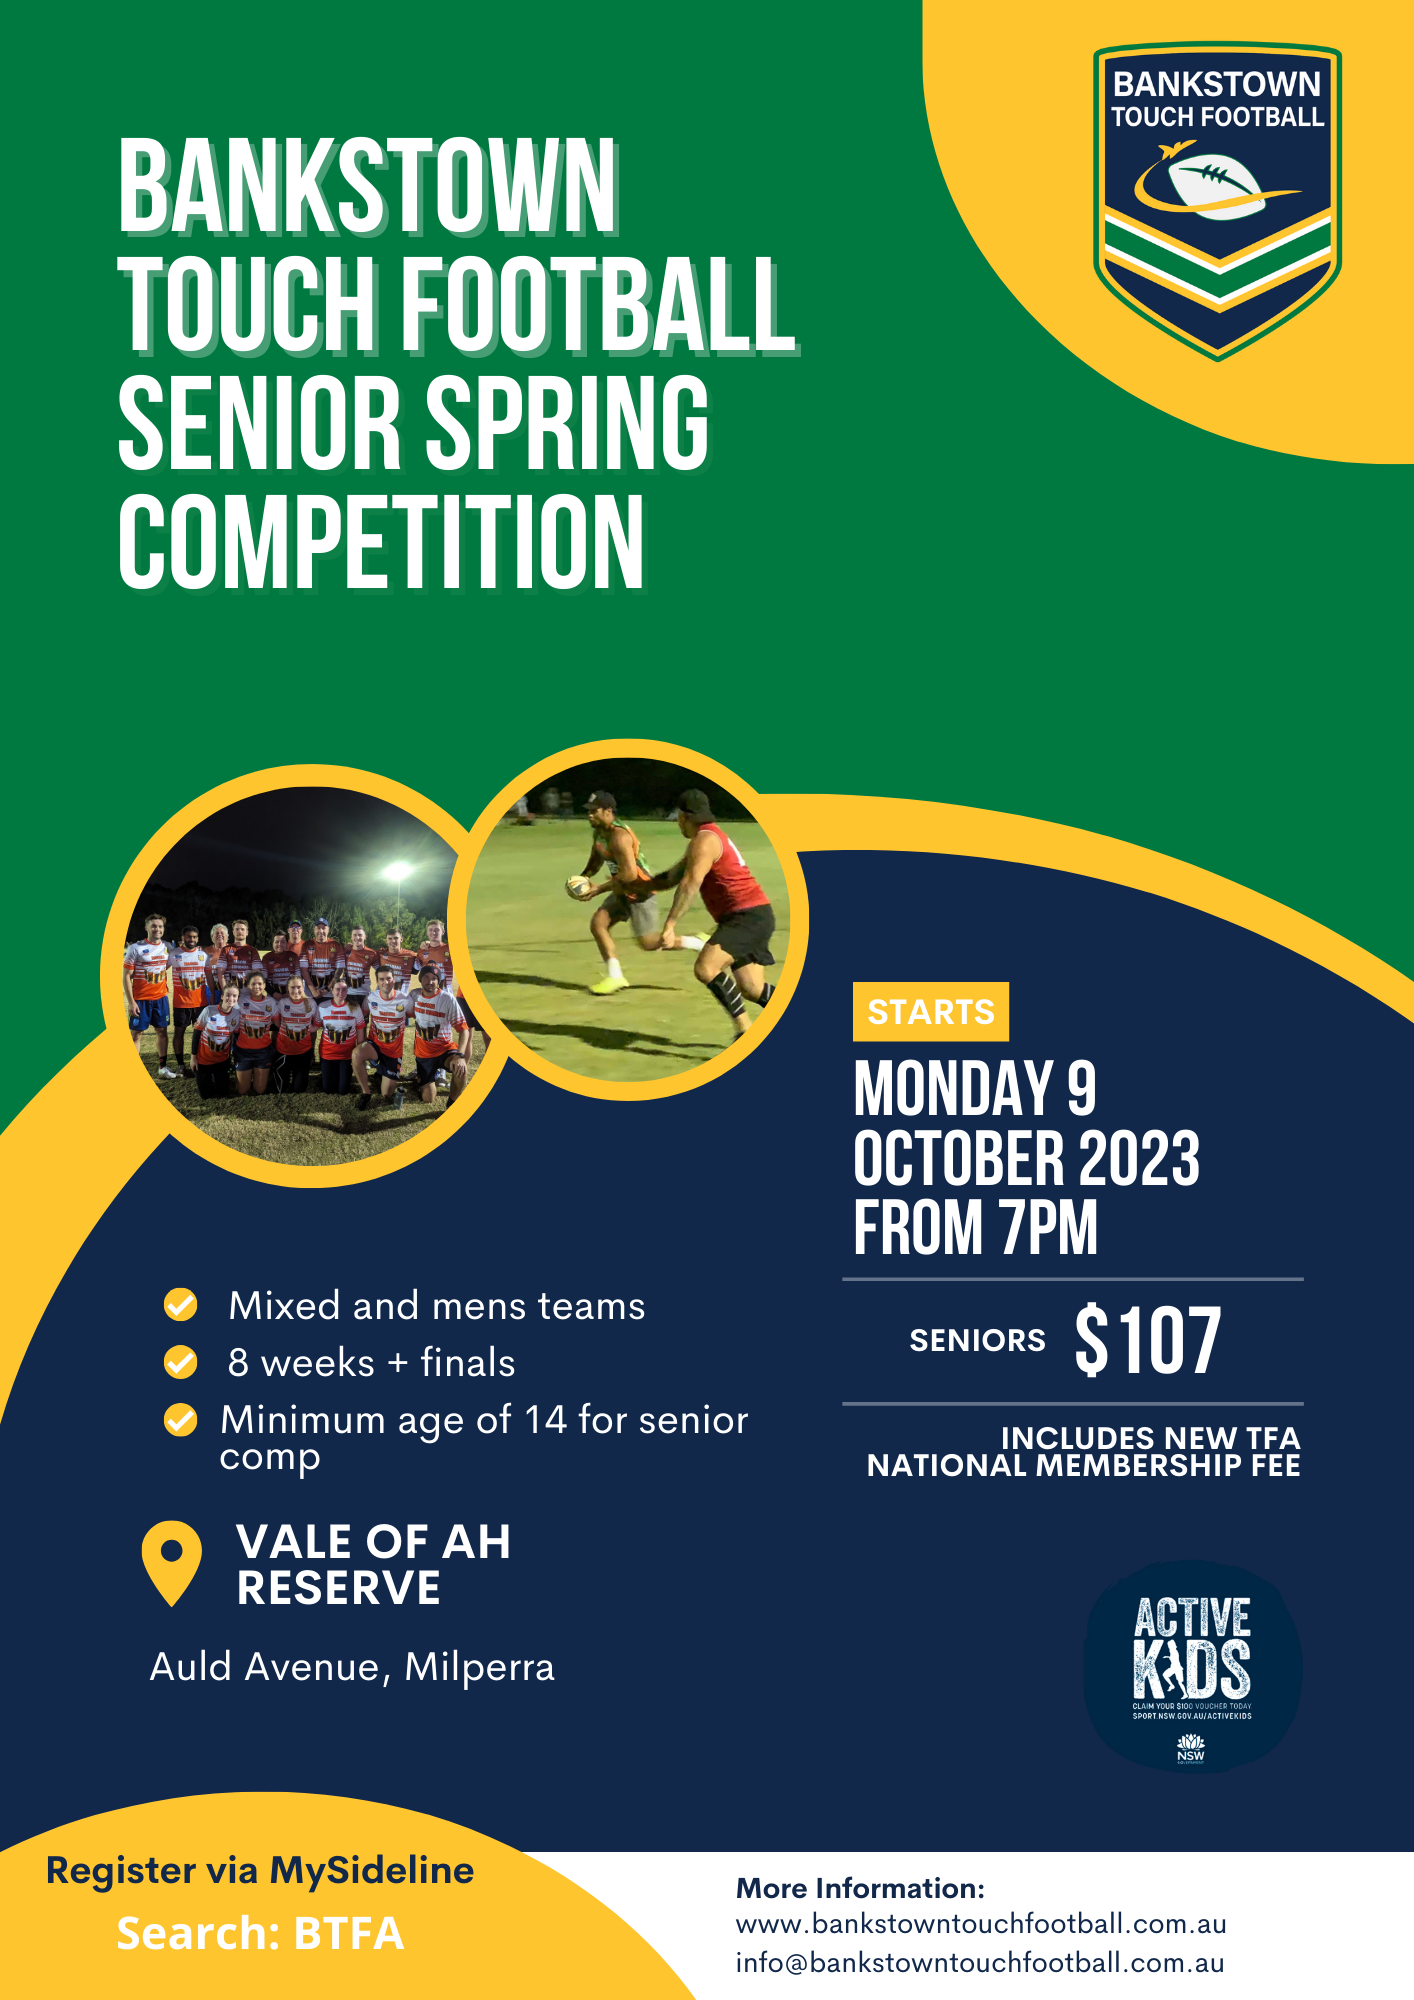 Spring competition flyer with price, dates and images of people playing touch football